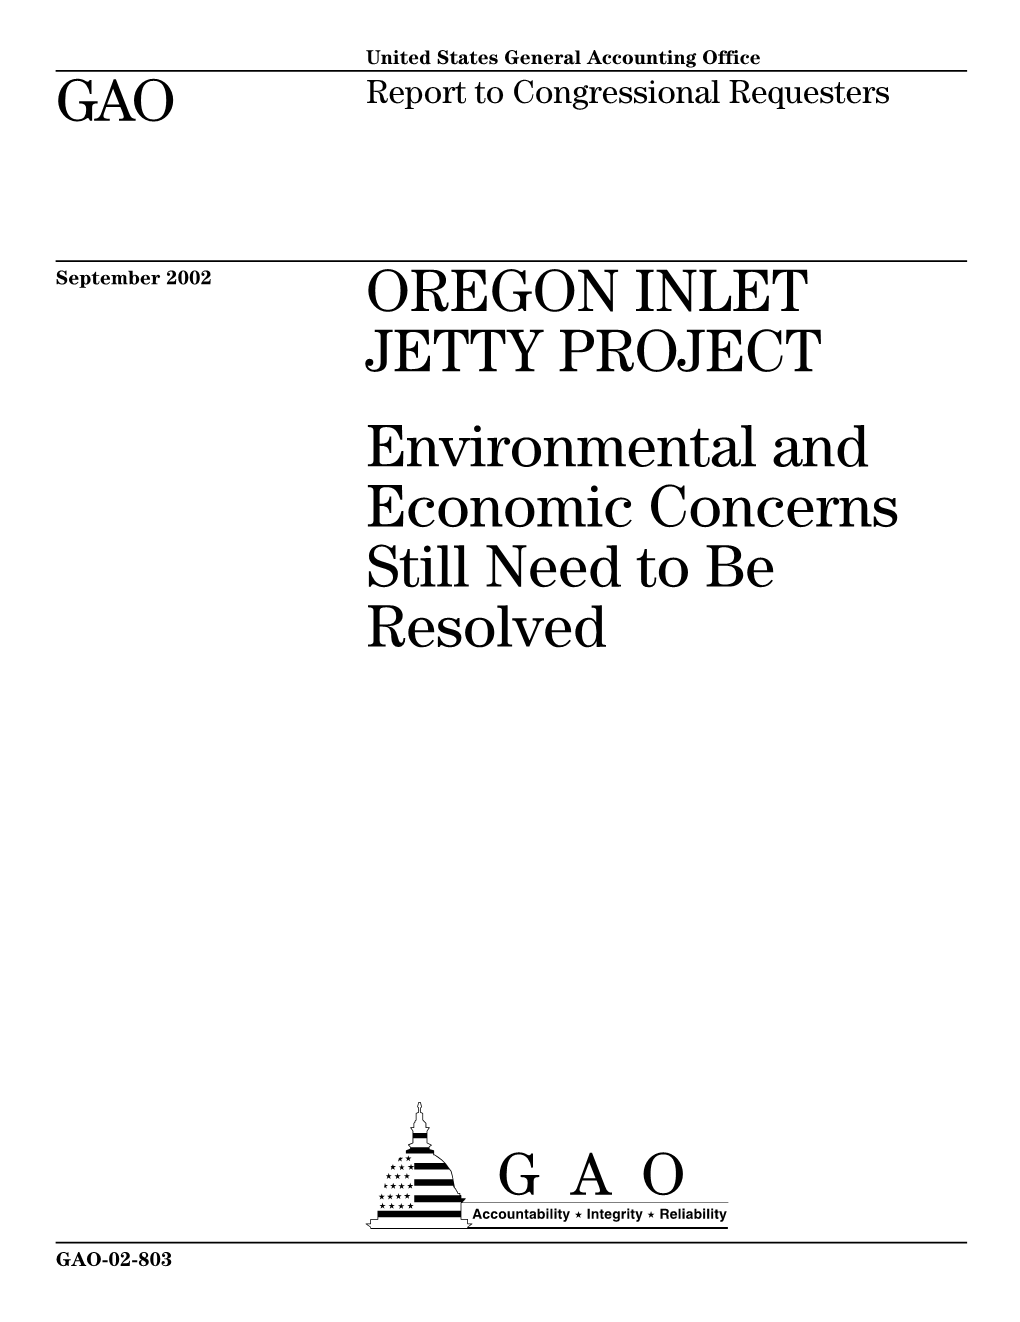 GAO-02-803 Oregon Inlet Jetty Project: Environmental and Economic